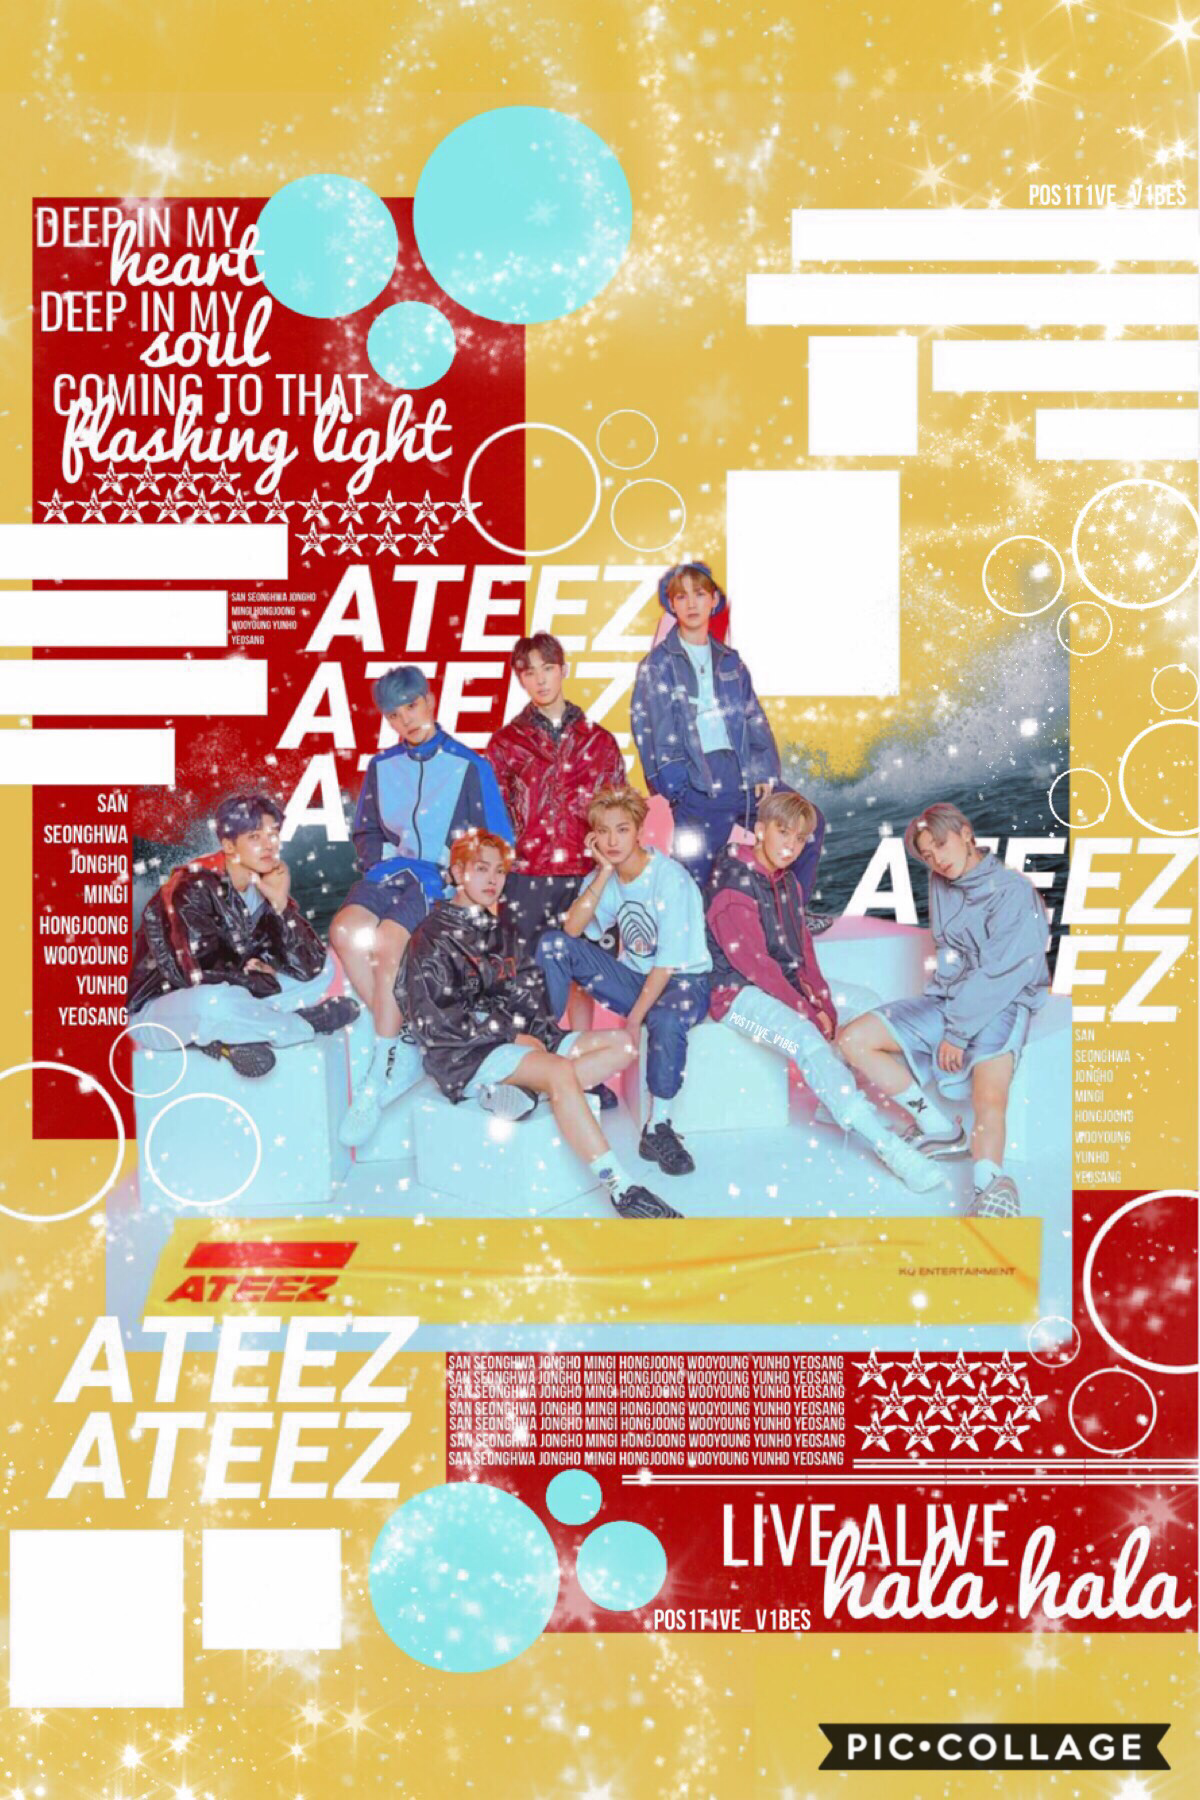 🌙aH i’m so obsesseD with ateez :) go check them out lol🌙 i’m sorry for being inactive :( schools been quite stressful🌙on a side note, my english class is better than expected ! but i’ve gotten a few projects already🌙
#PCONLY
#ATEEZ
#INACTIVE:(
#SCHOOL
#EN